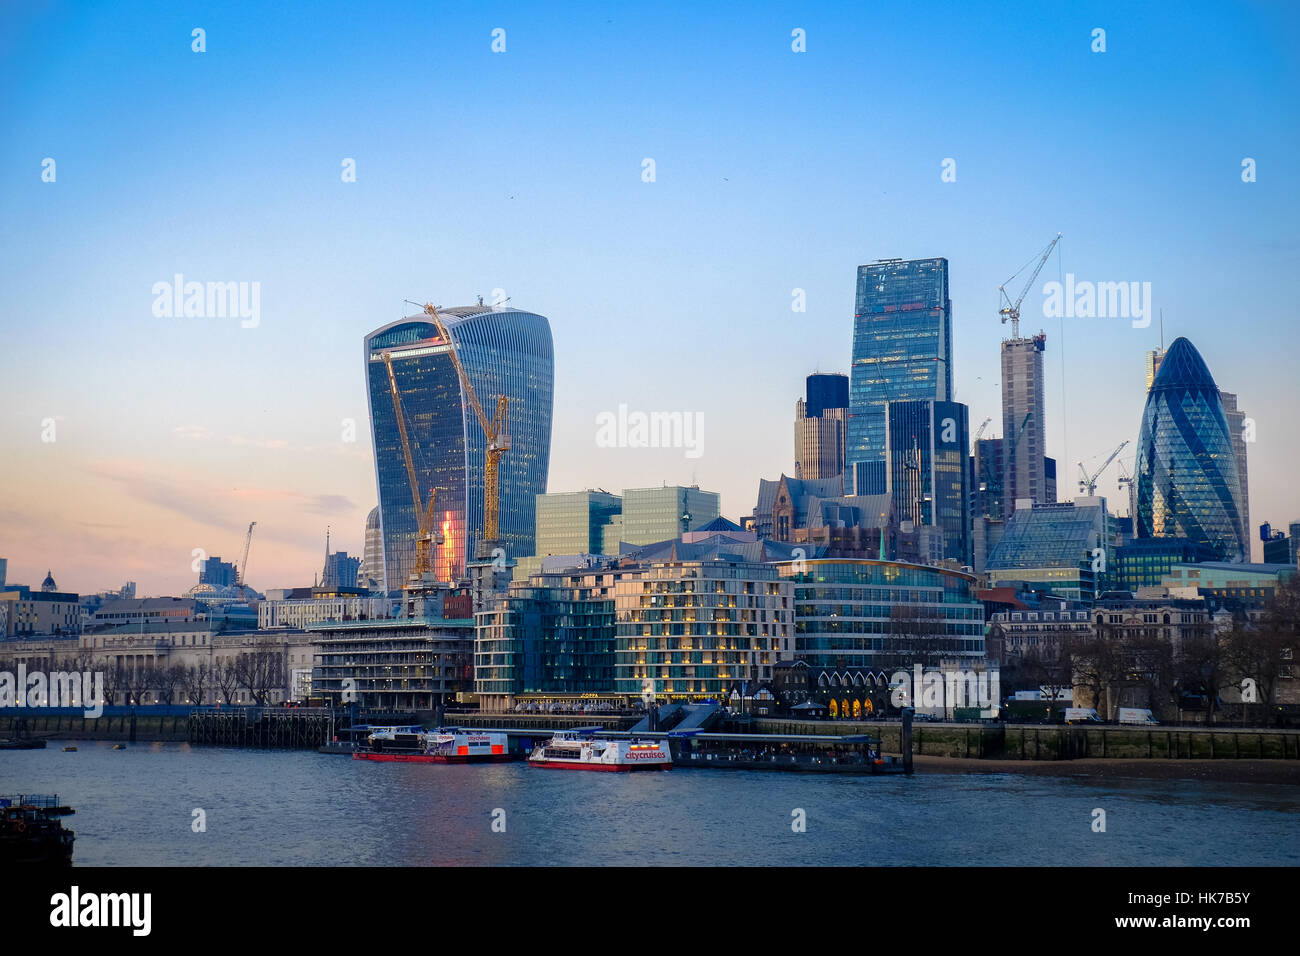 London's skyline at sunset with the River Thames in the foreground Stock Photo